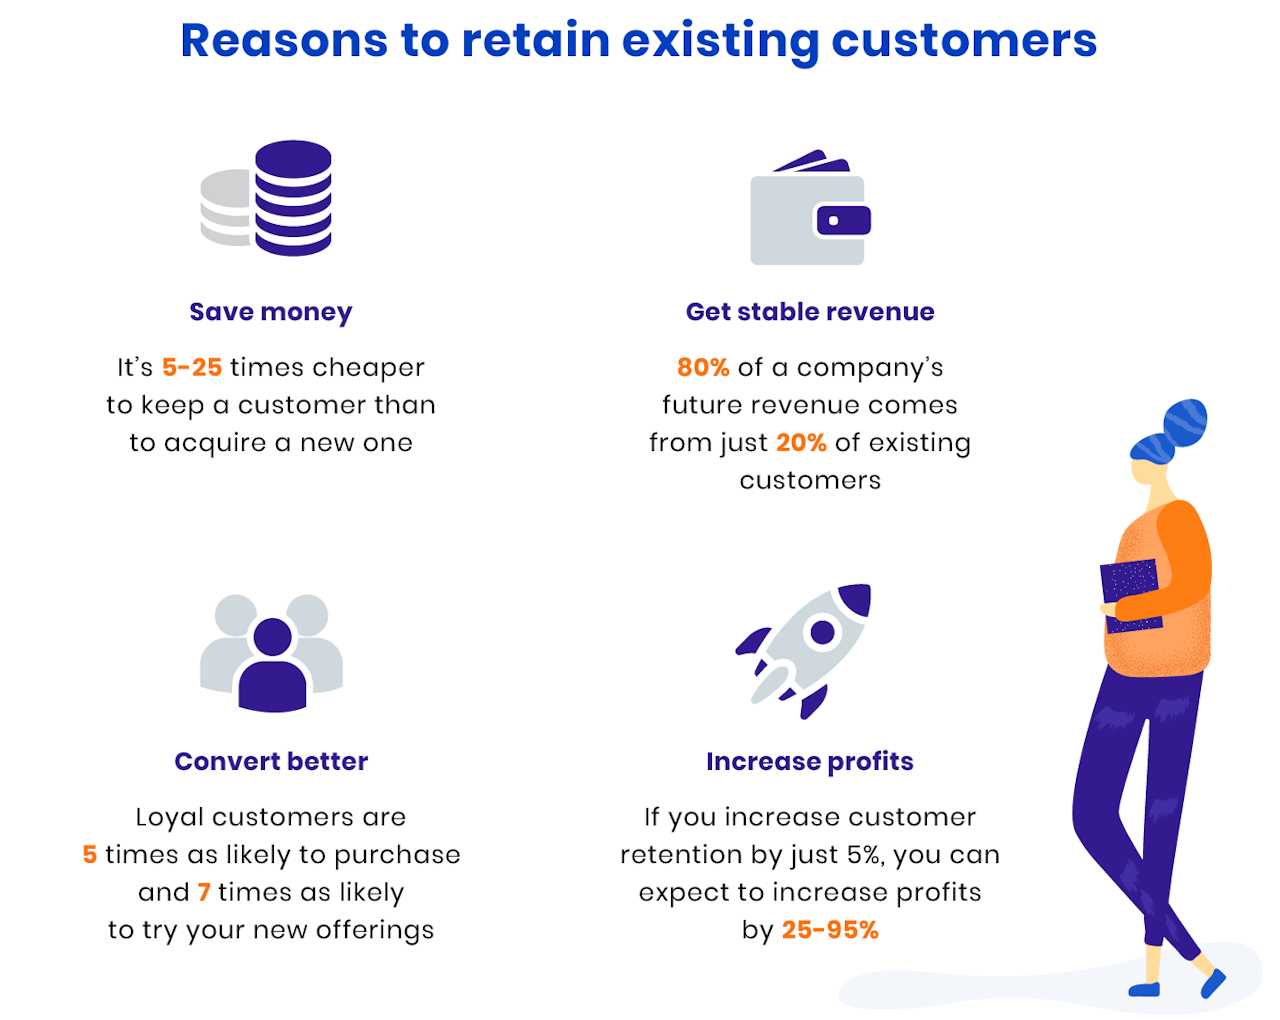 Relationship selling: retain existing customers